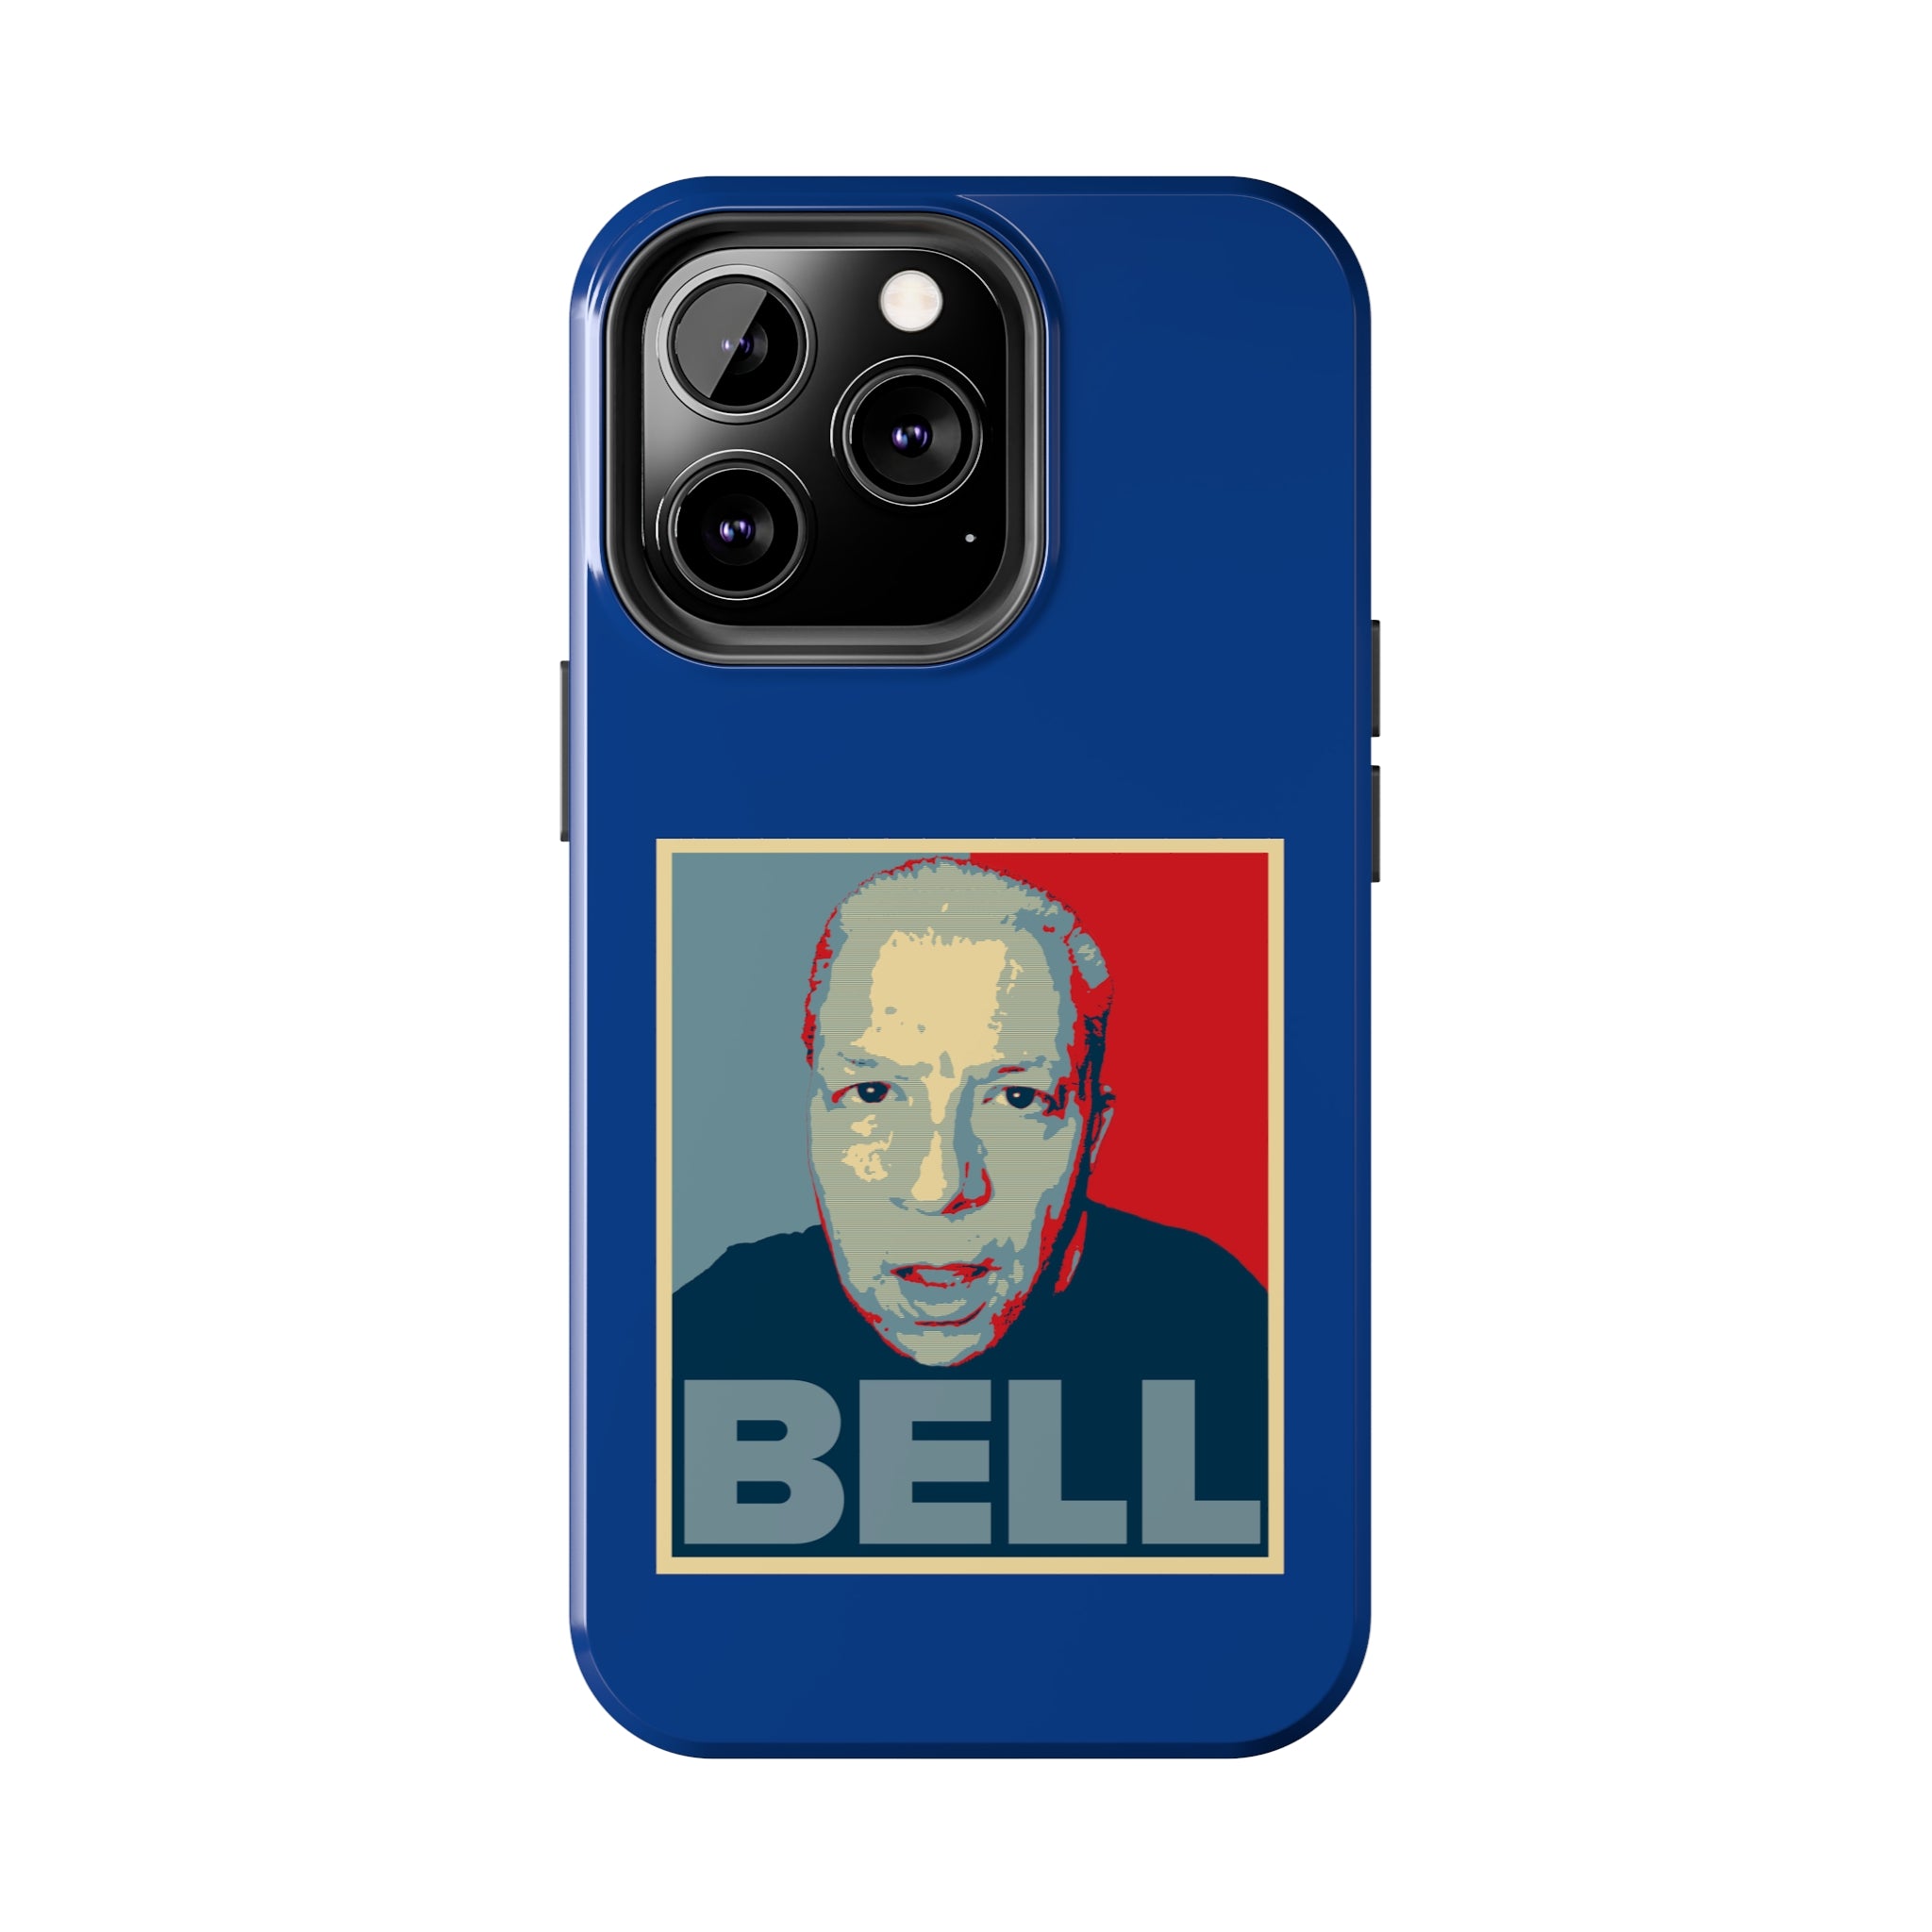 BELL Tough Phone Cases